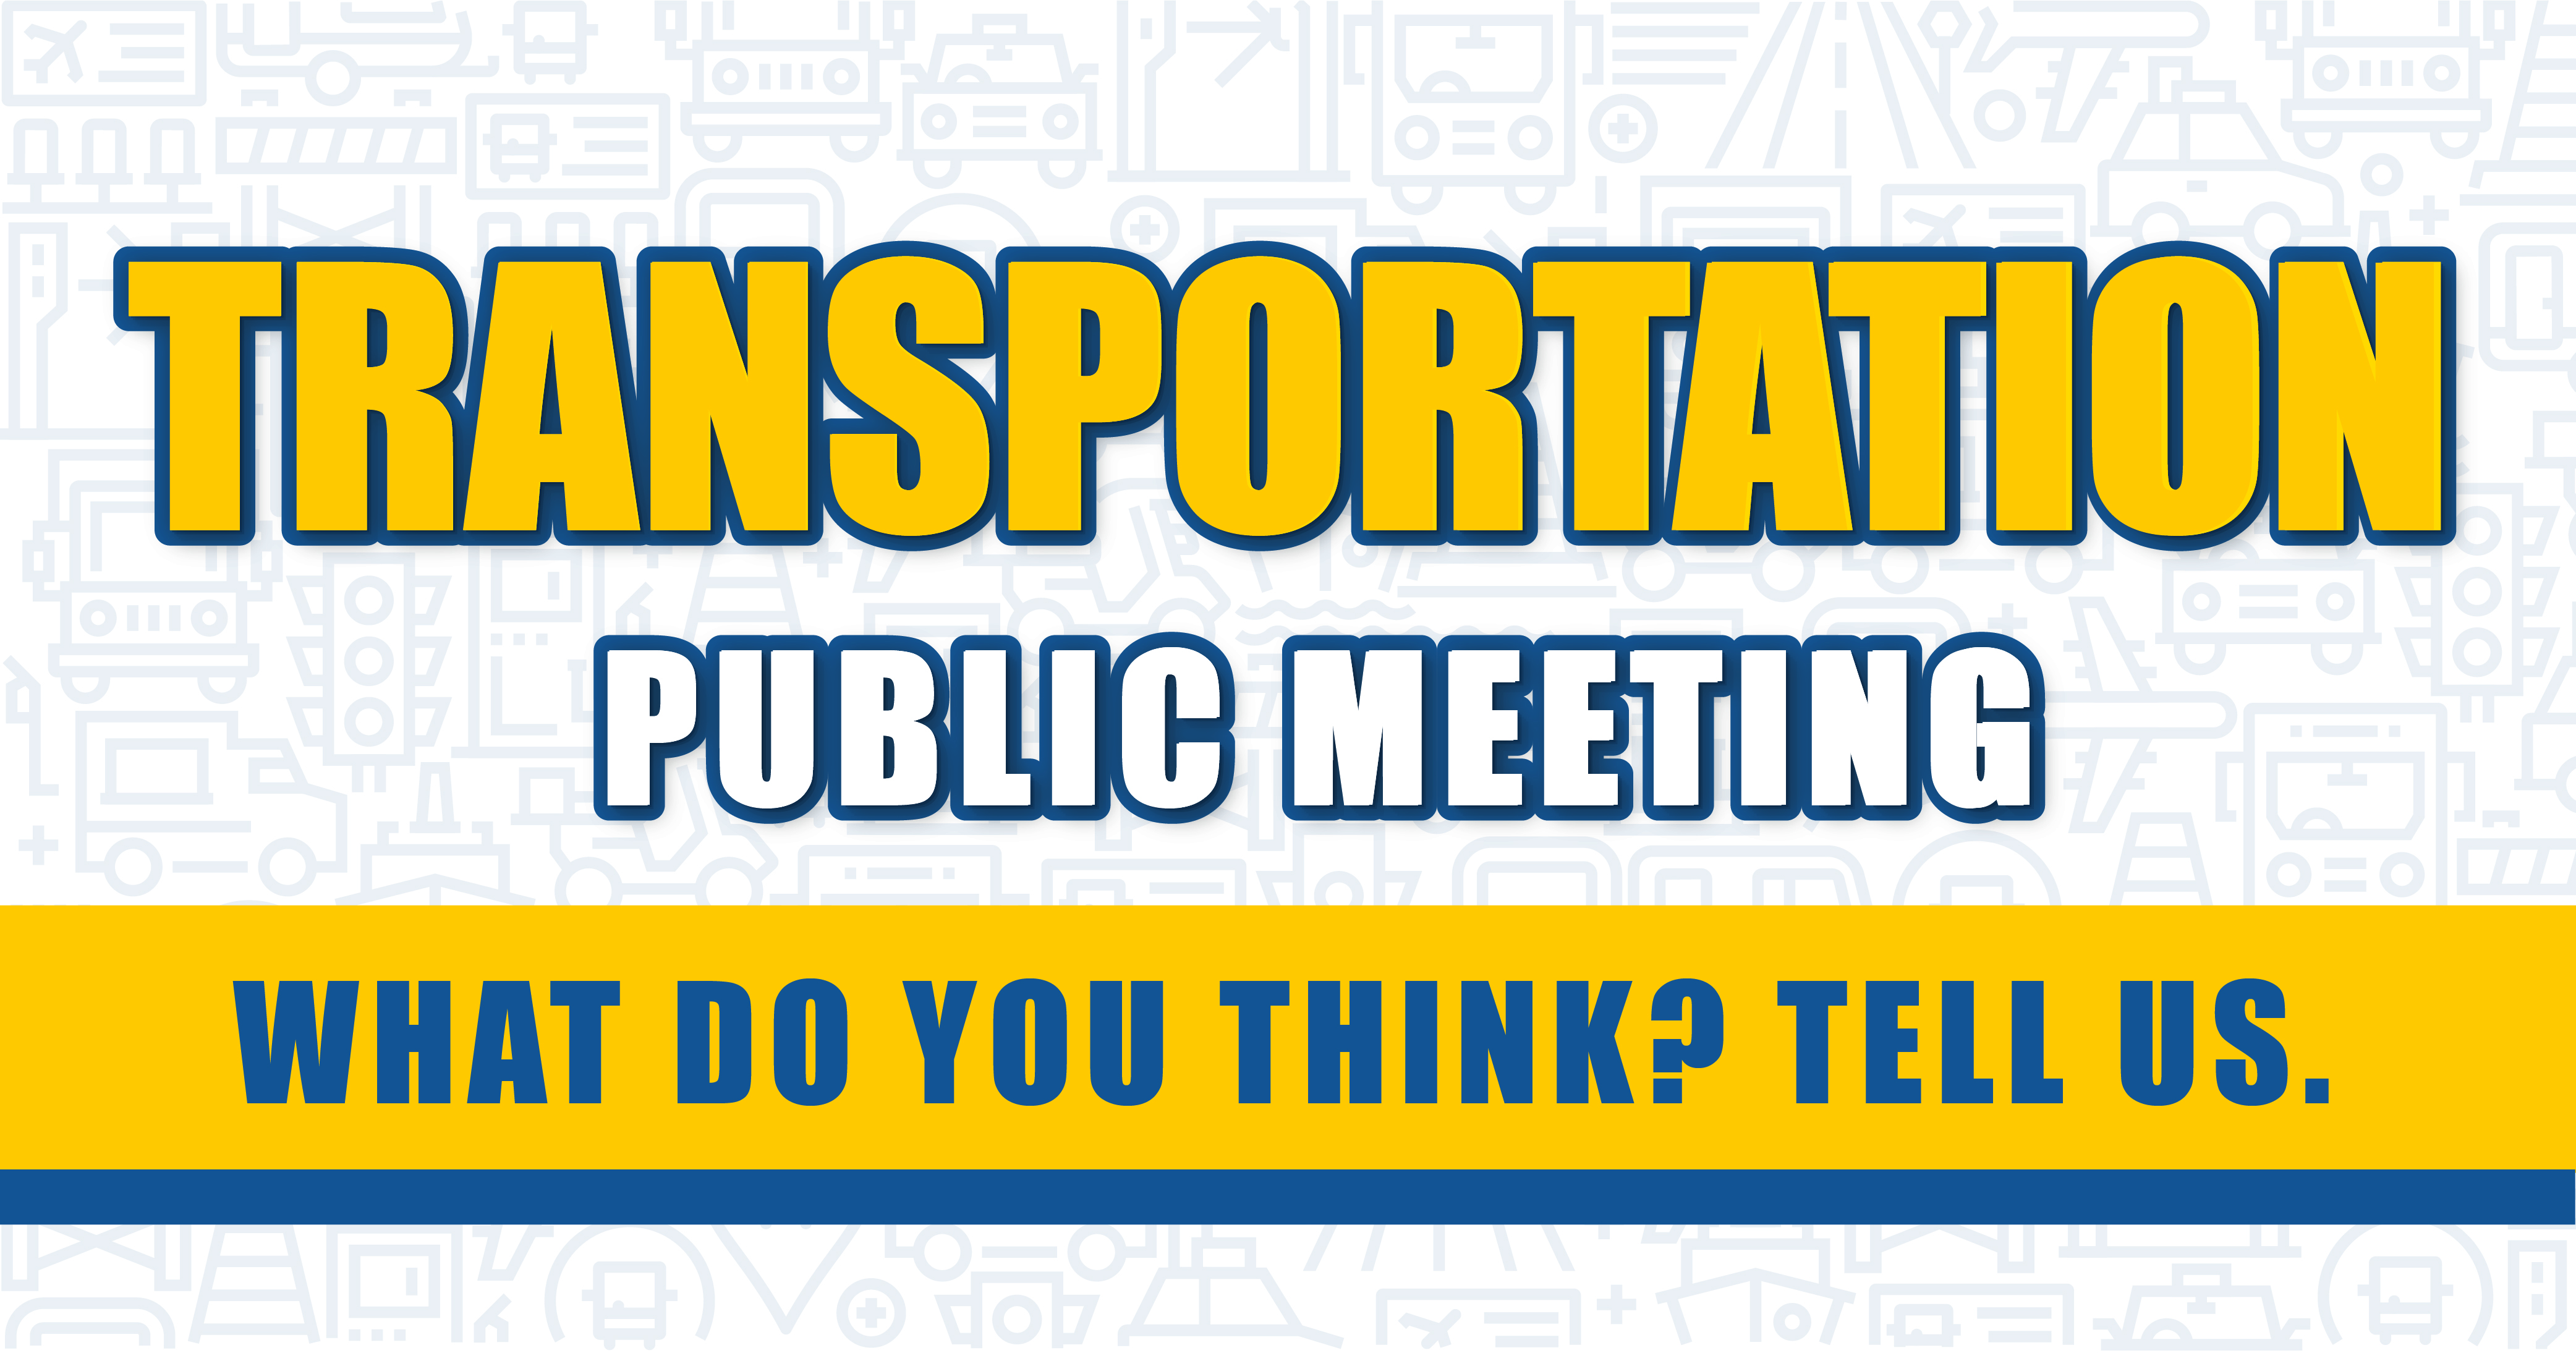 A transportation and public input logo with four links to transit planning, bicycle/ pedistrian mode of travel, metropolitan transportation plan and air quality